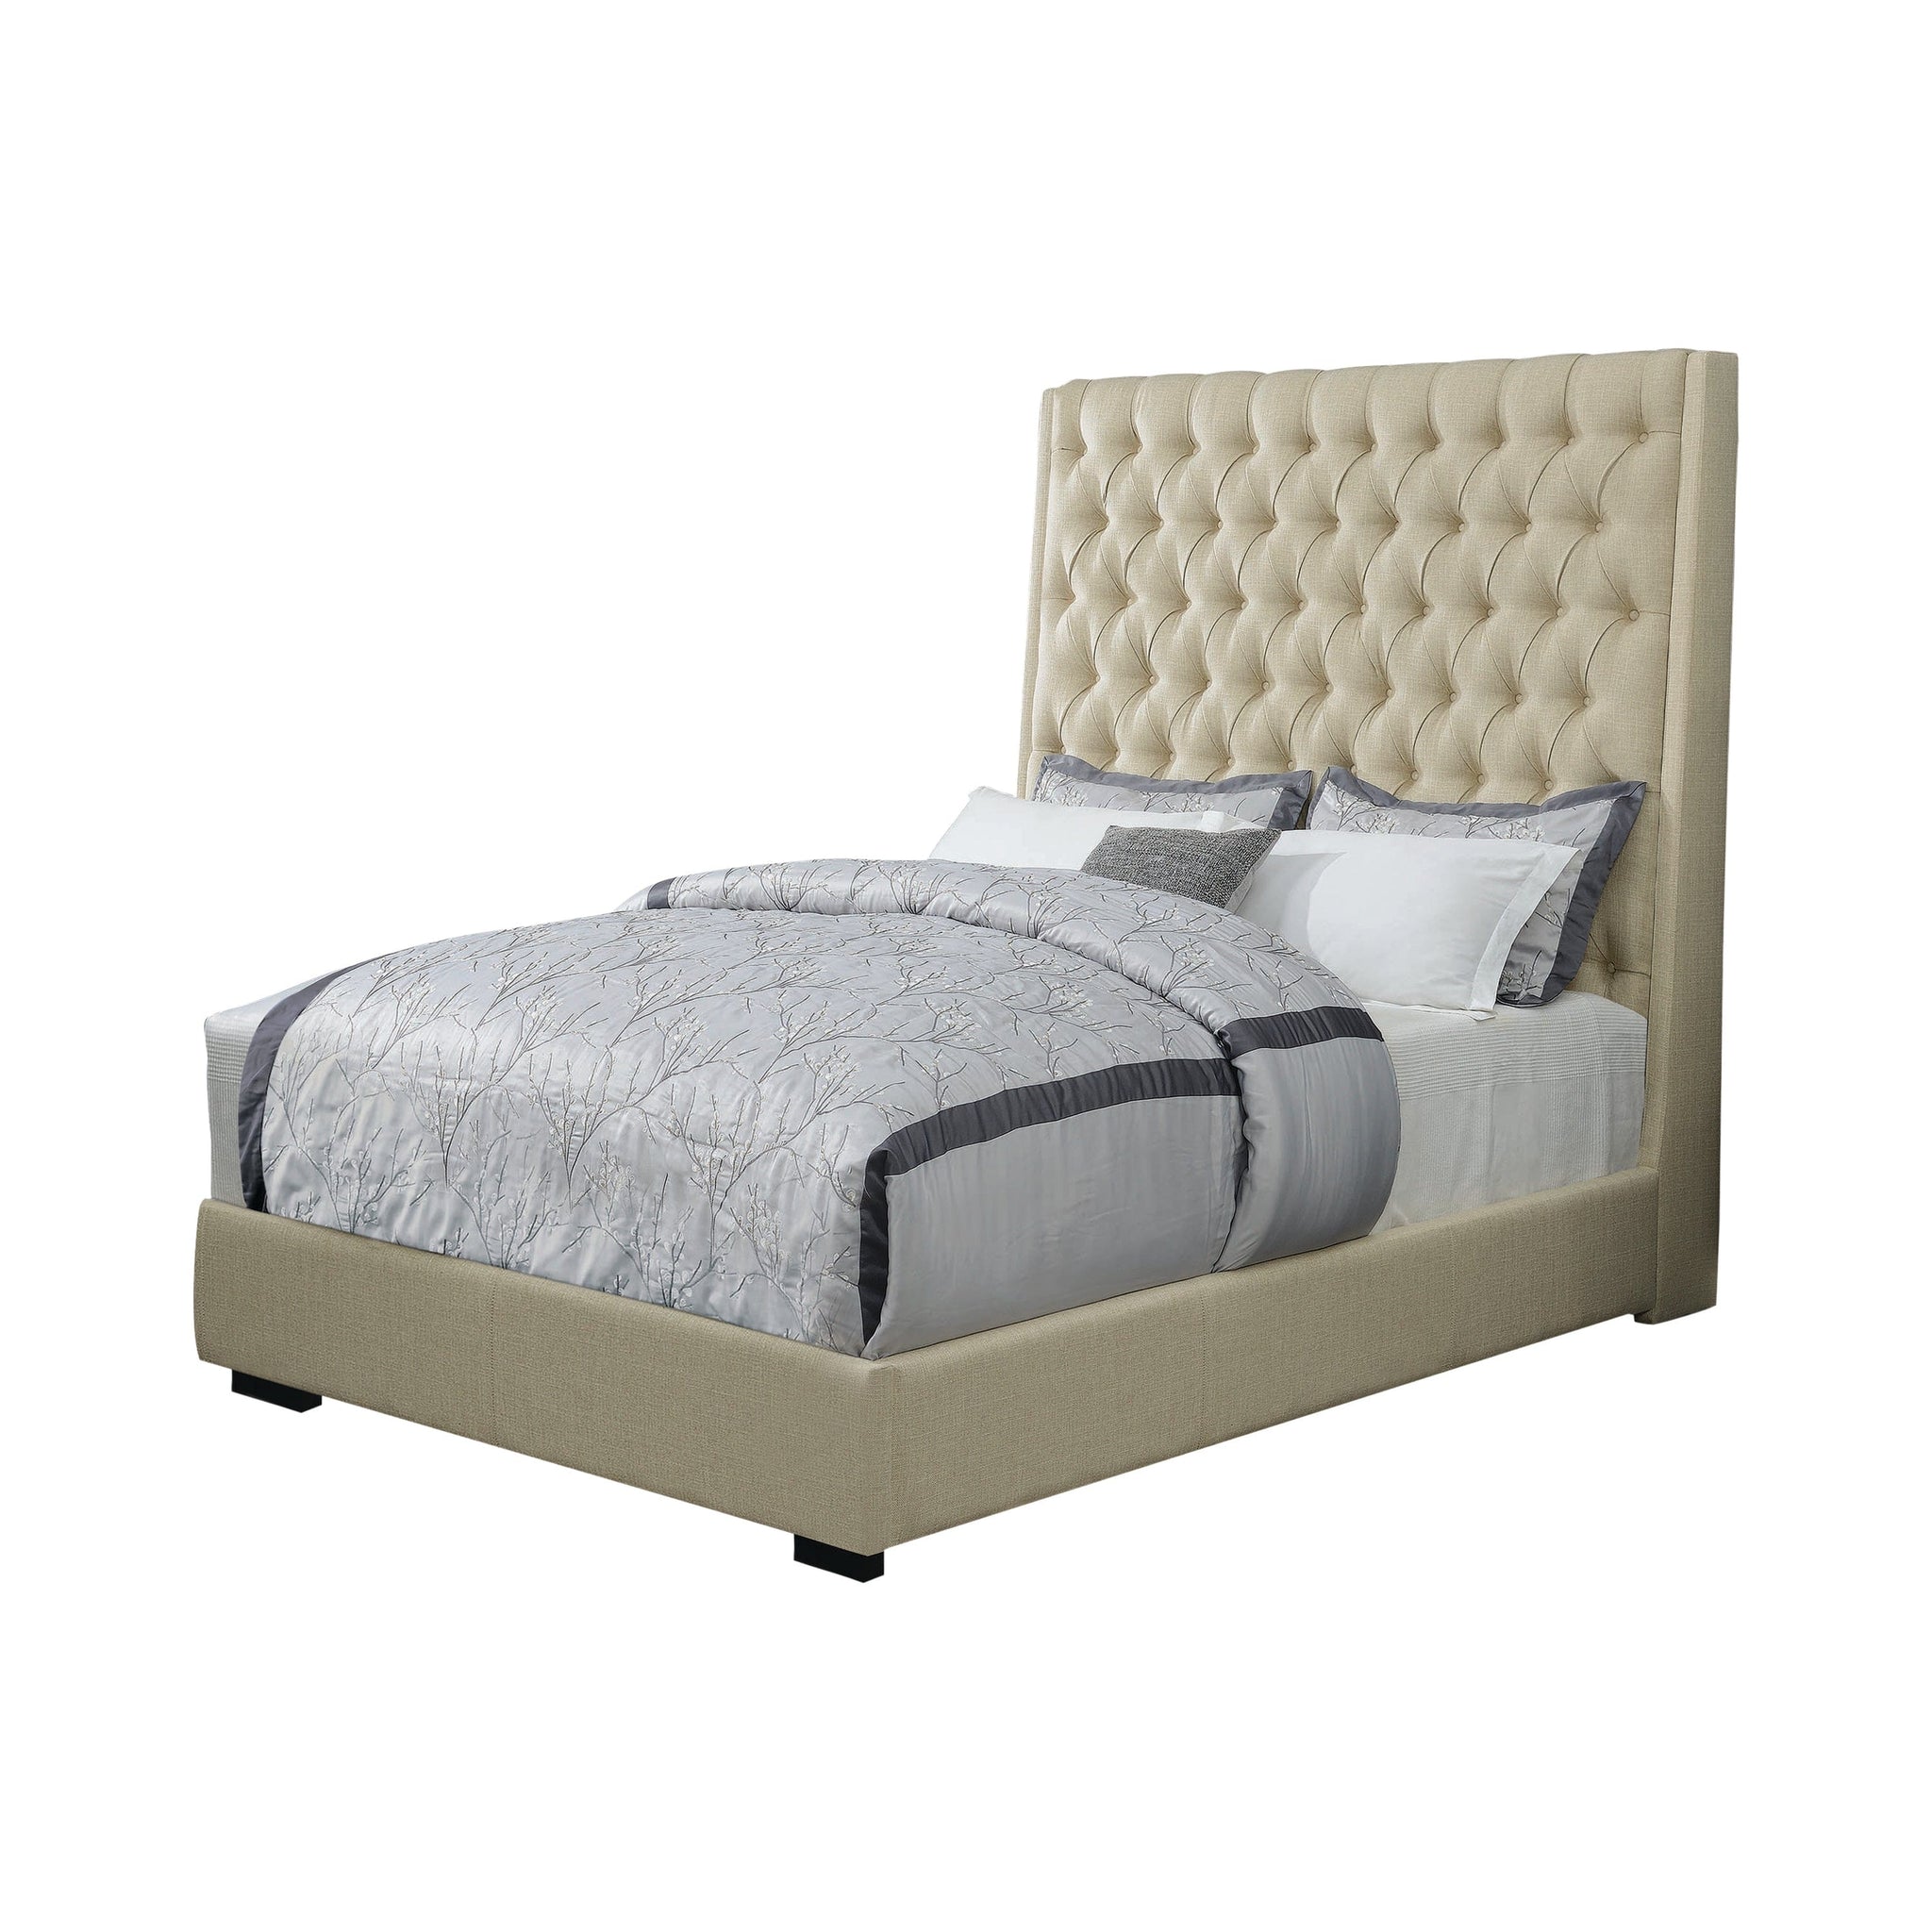 Camille Queen Button Tufted Bed Cream - 300722Q